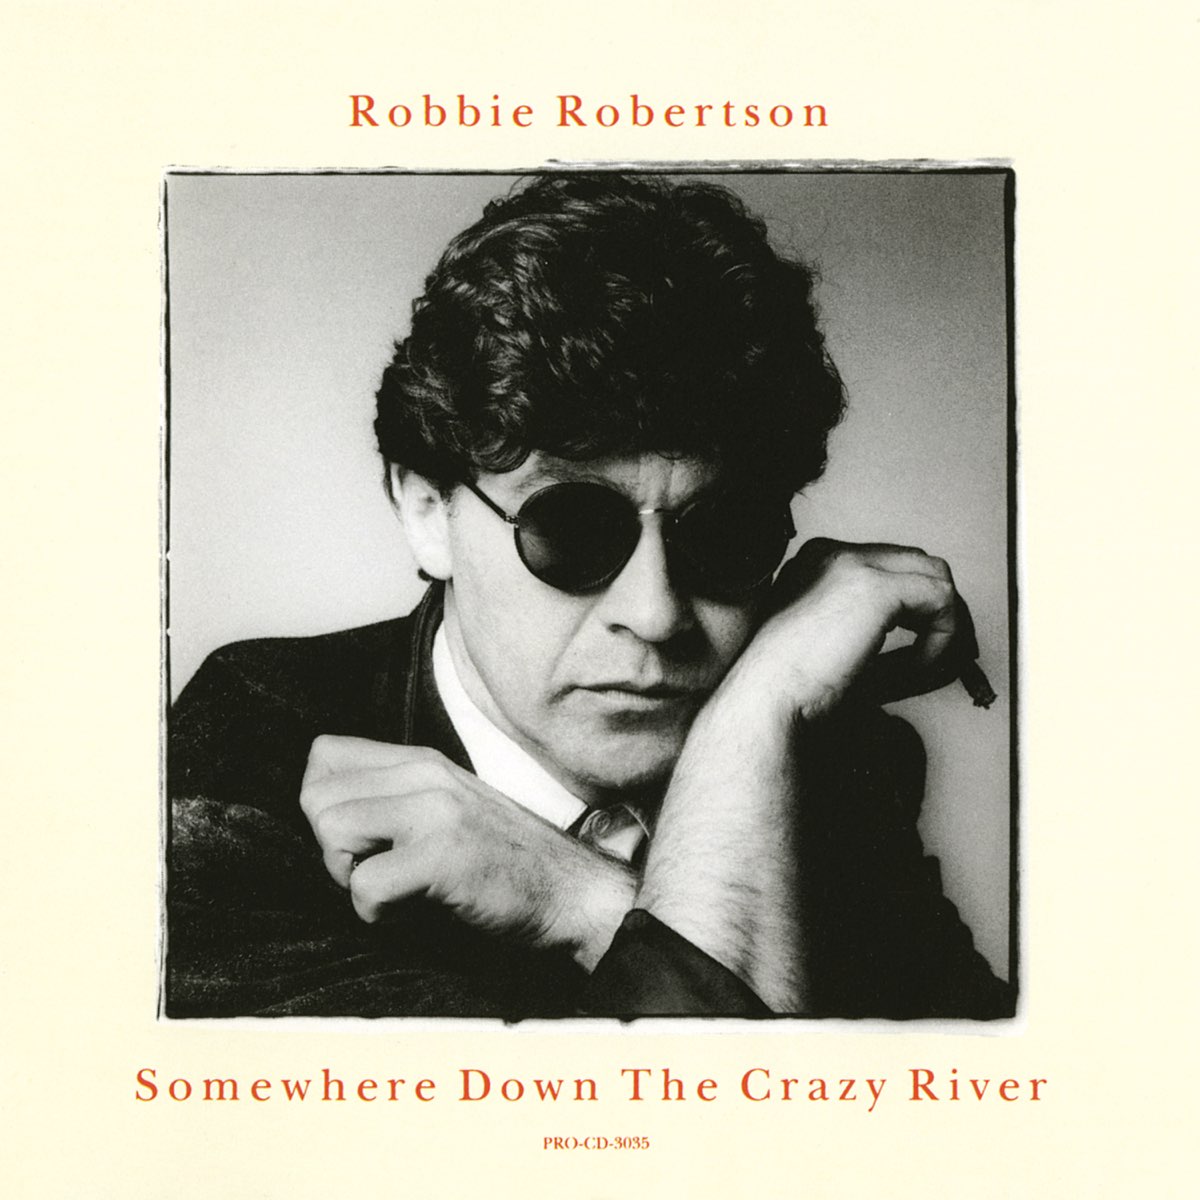 Robbie Robertson – Somewhere Down The Crazy River